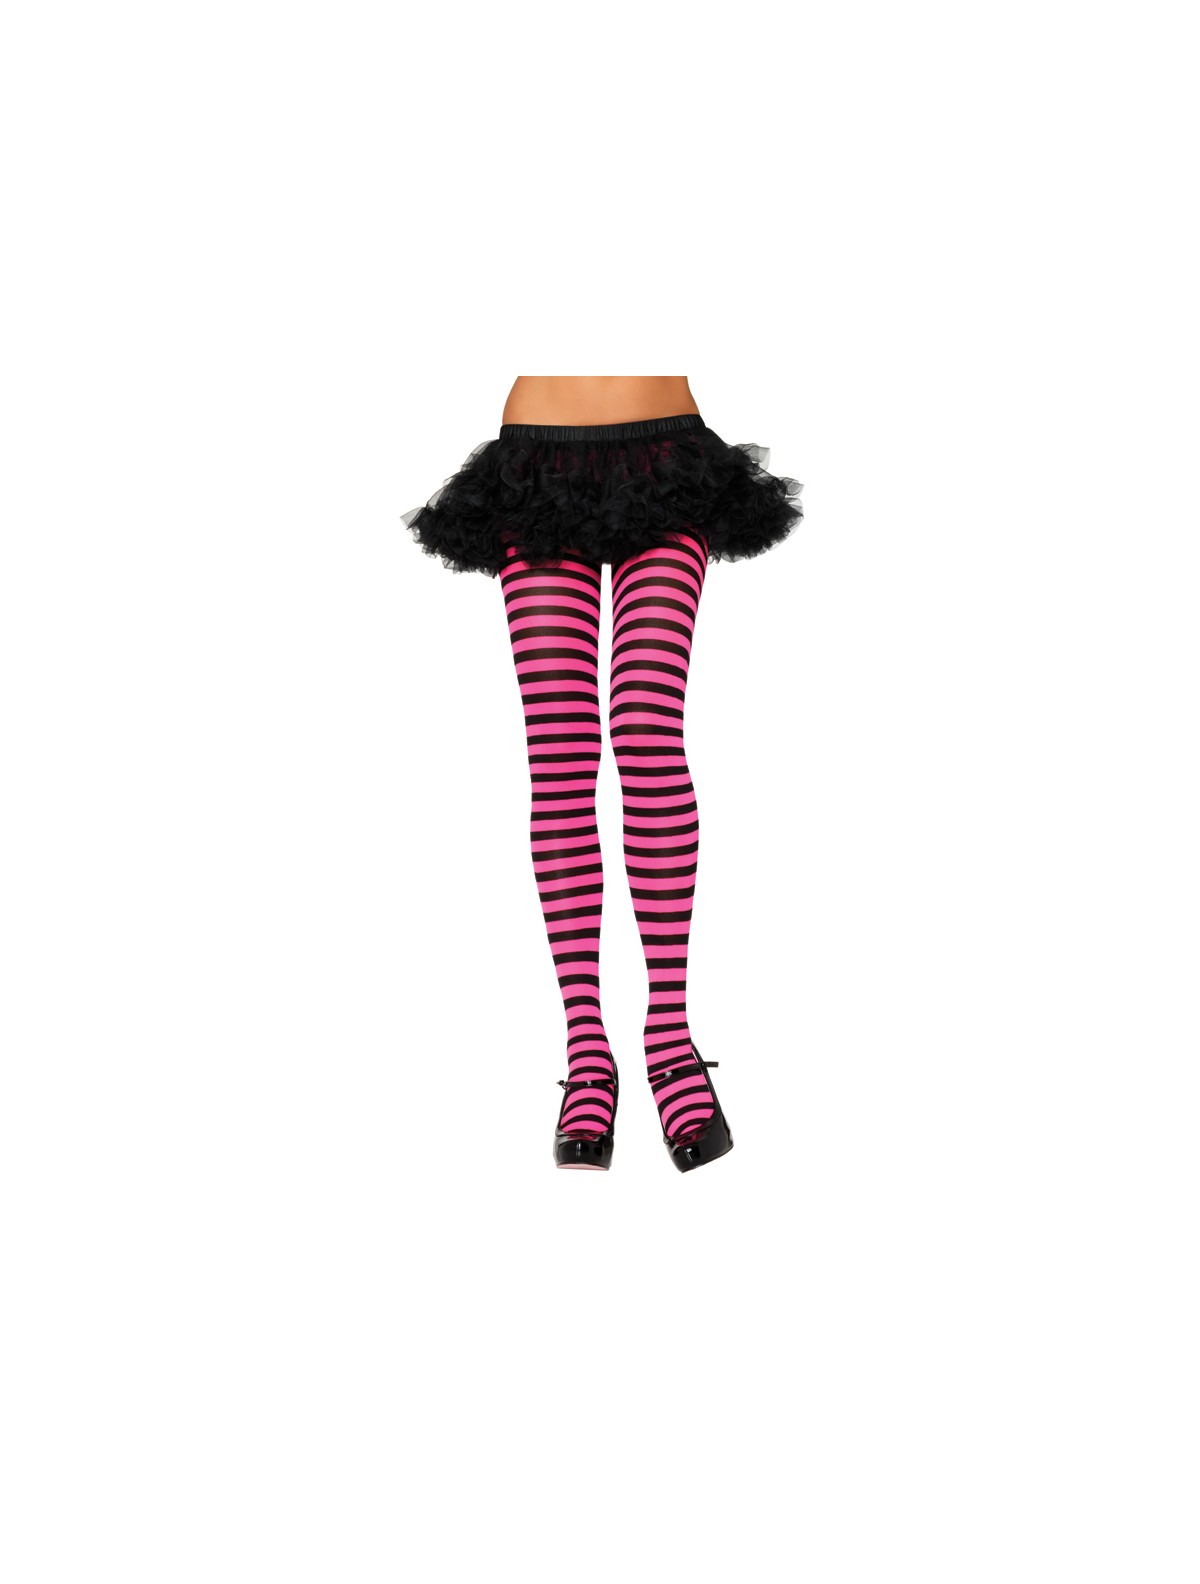 Leg Avenue Stripe Tights. Many different trendy colours to choose from.